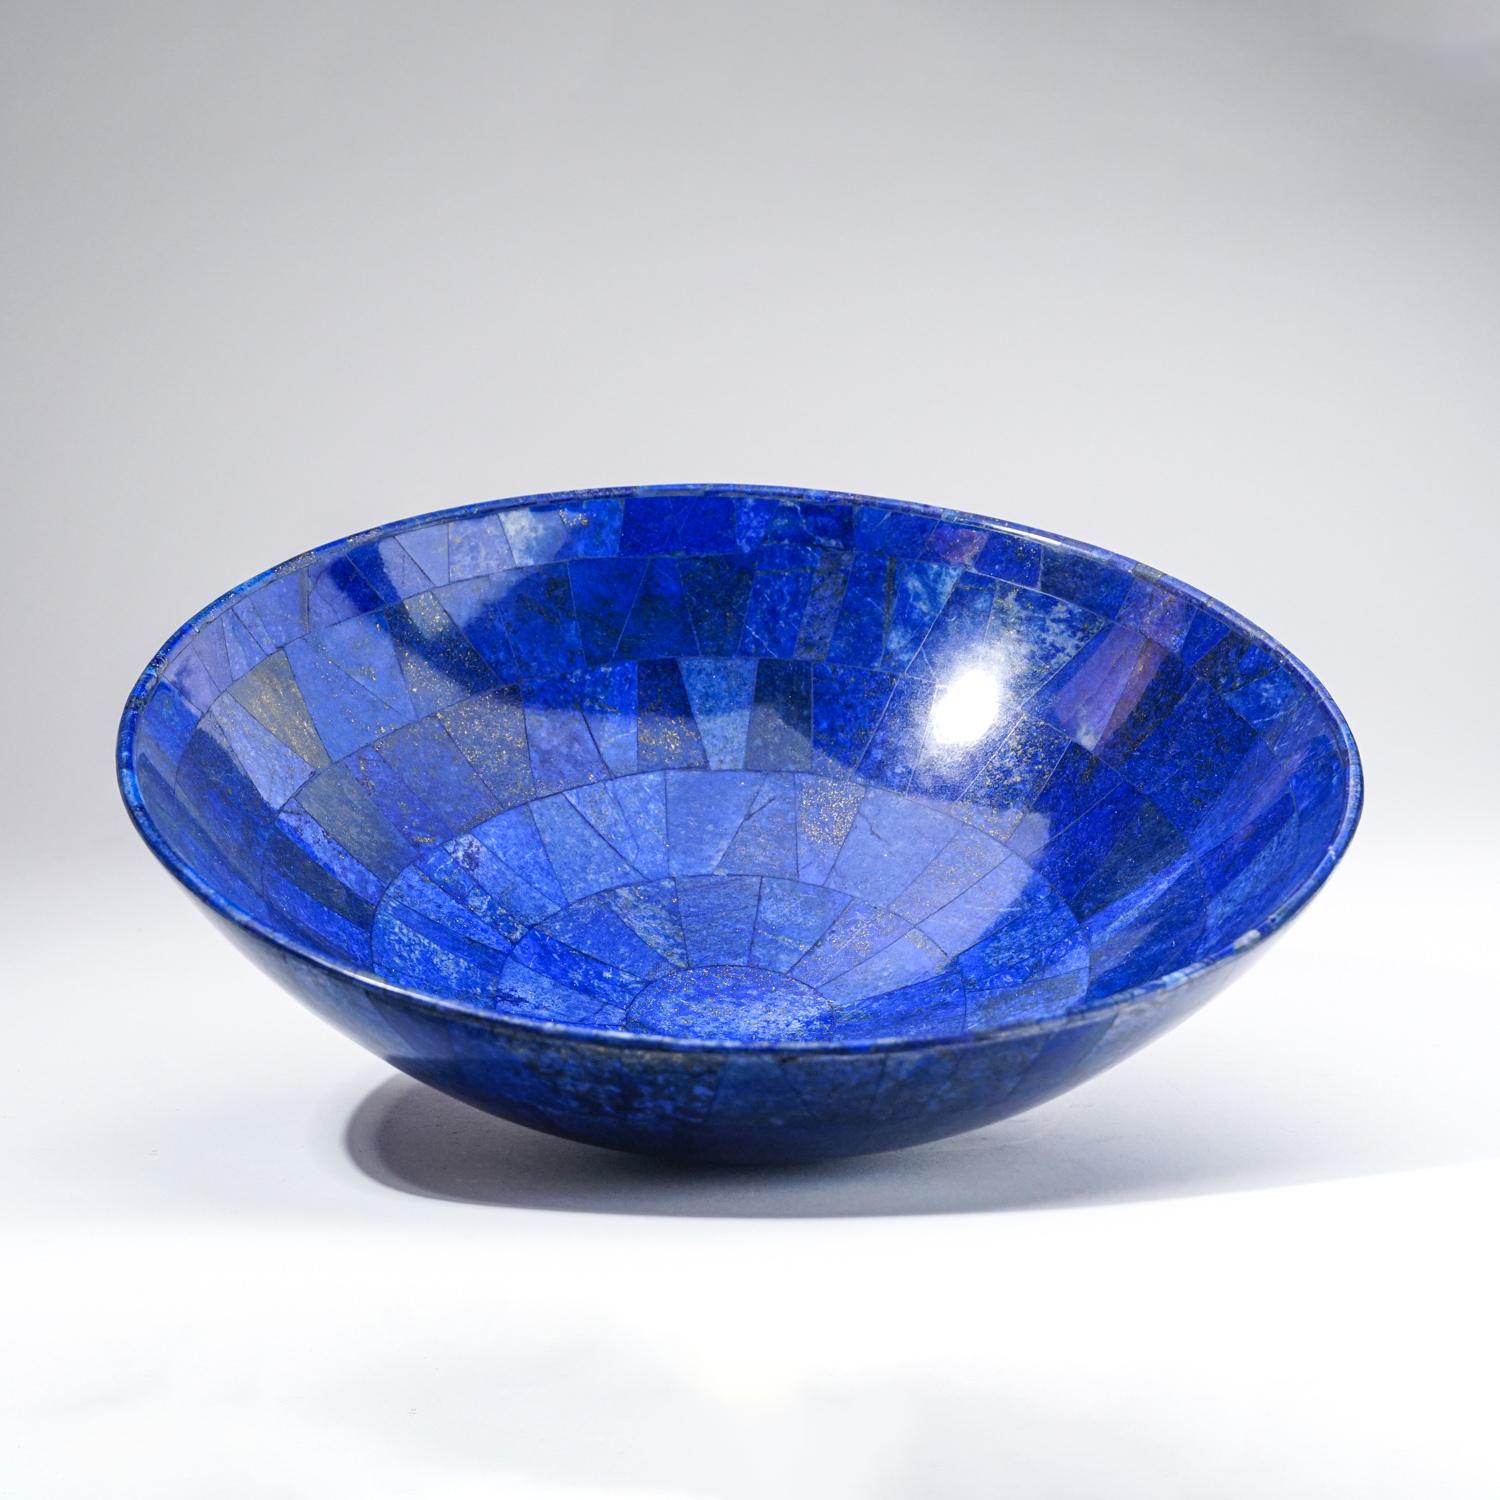 Contemporary Genuine Polished Lapis Lazuli Bowl (3.6 lbs) For Sale